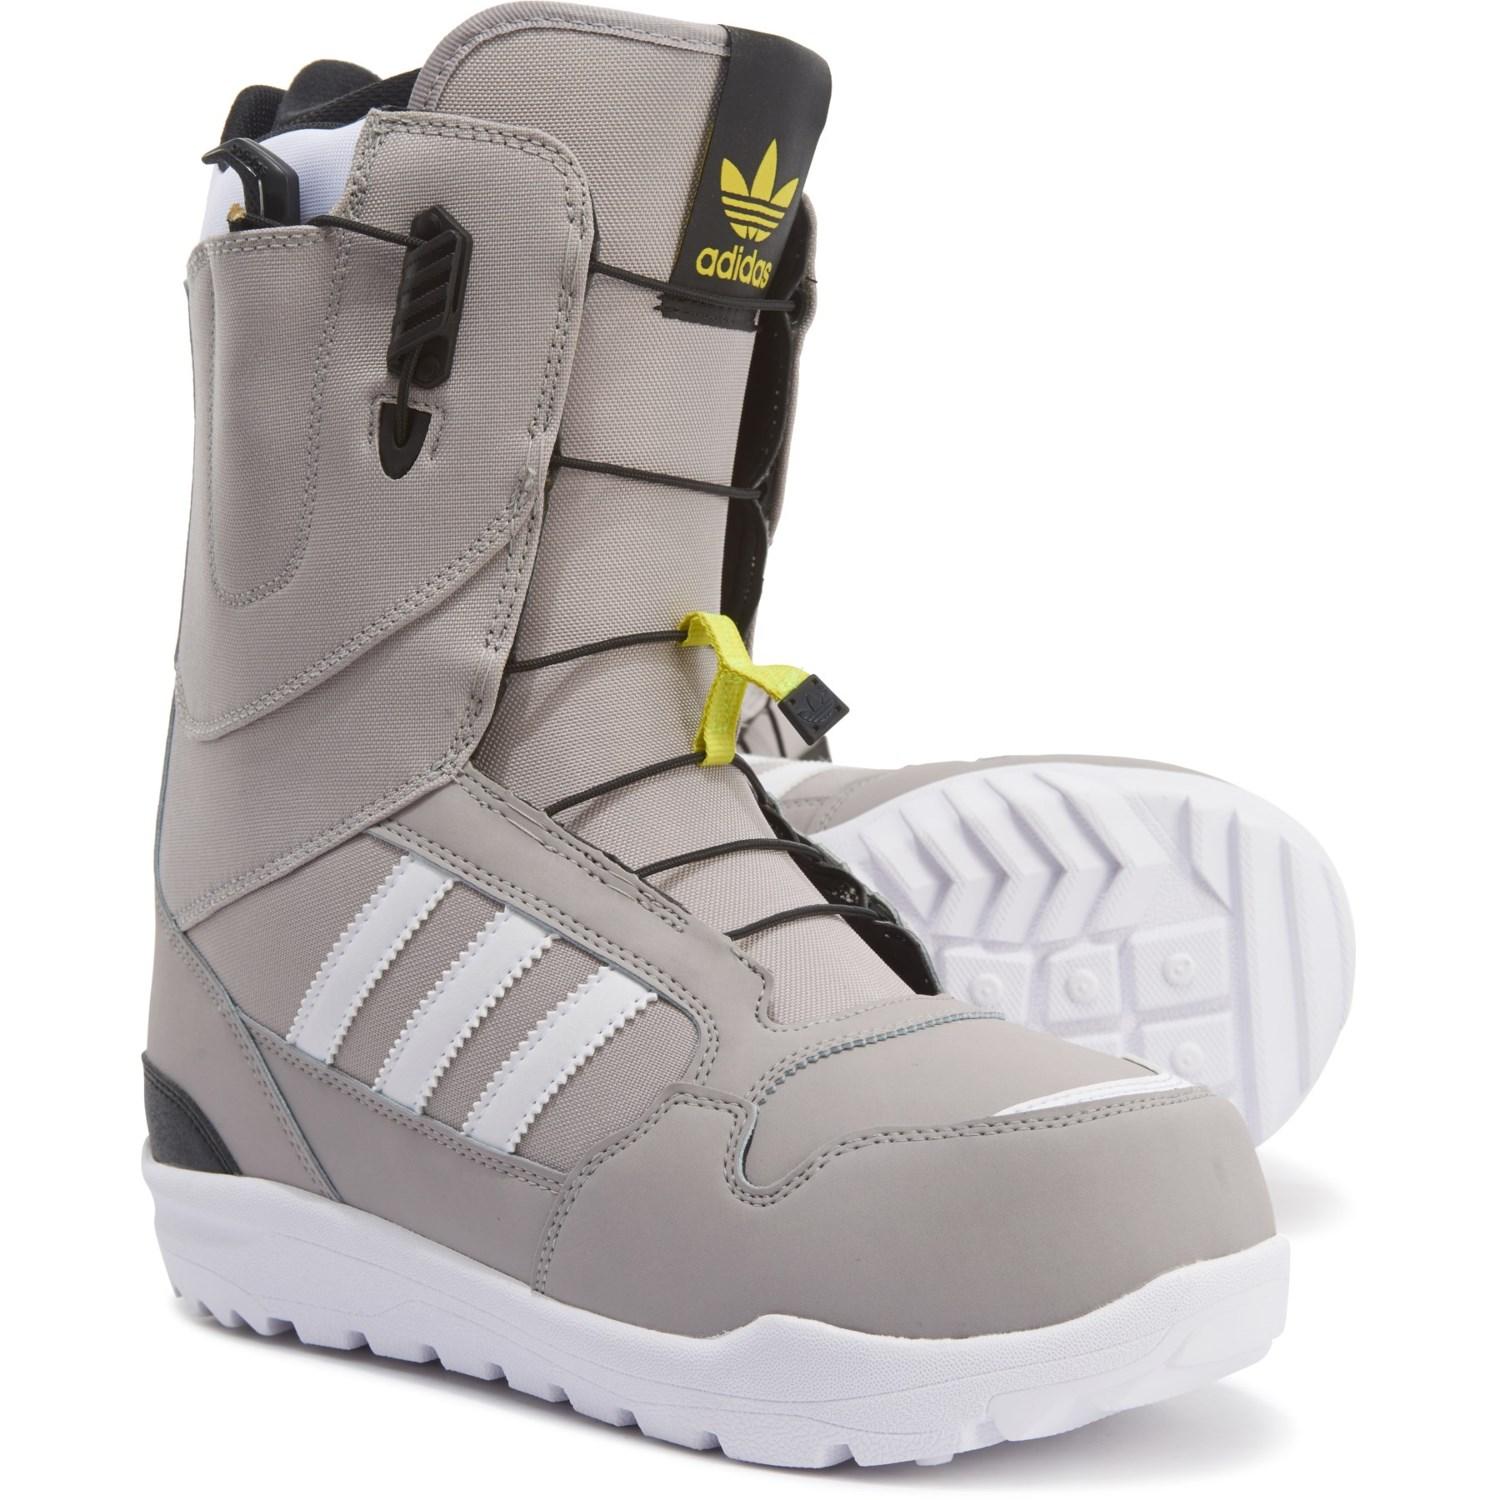 adidas Grey-white-yellow Zx 500 Snowboard Boots in Gray for Men - Lyst